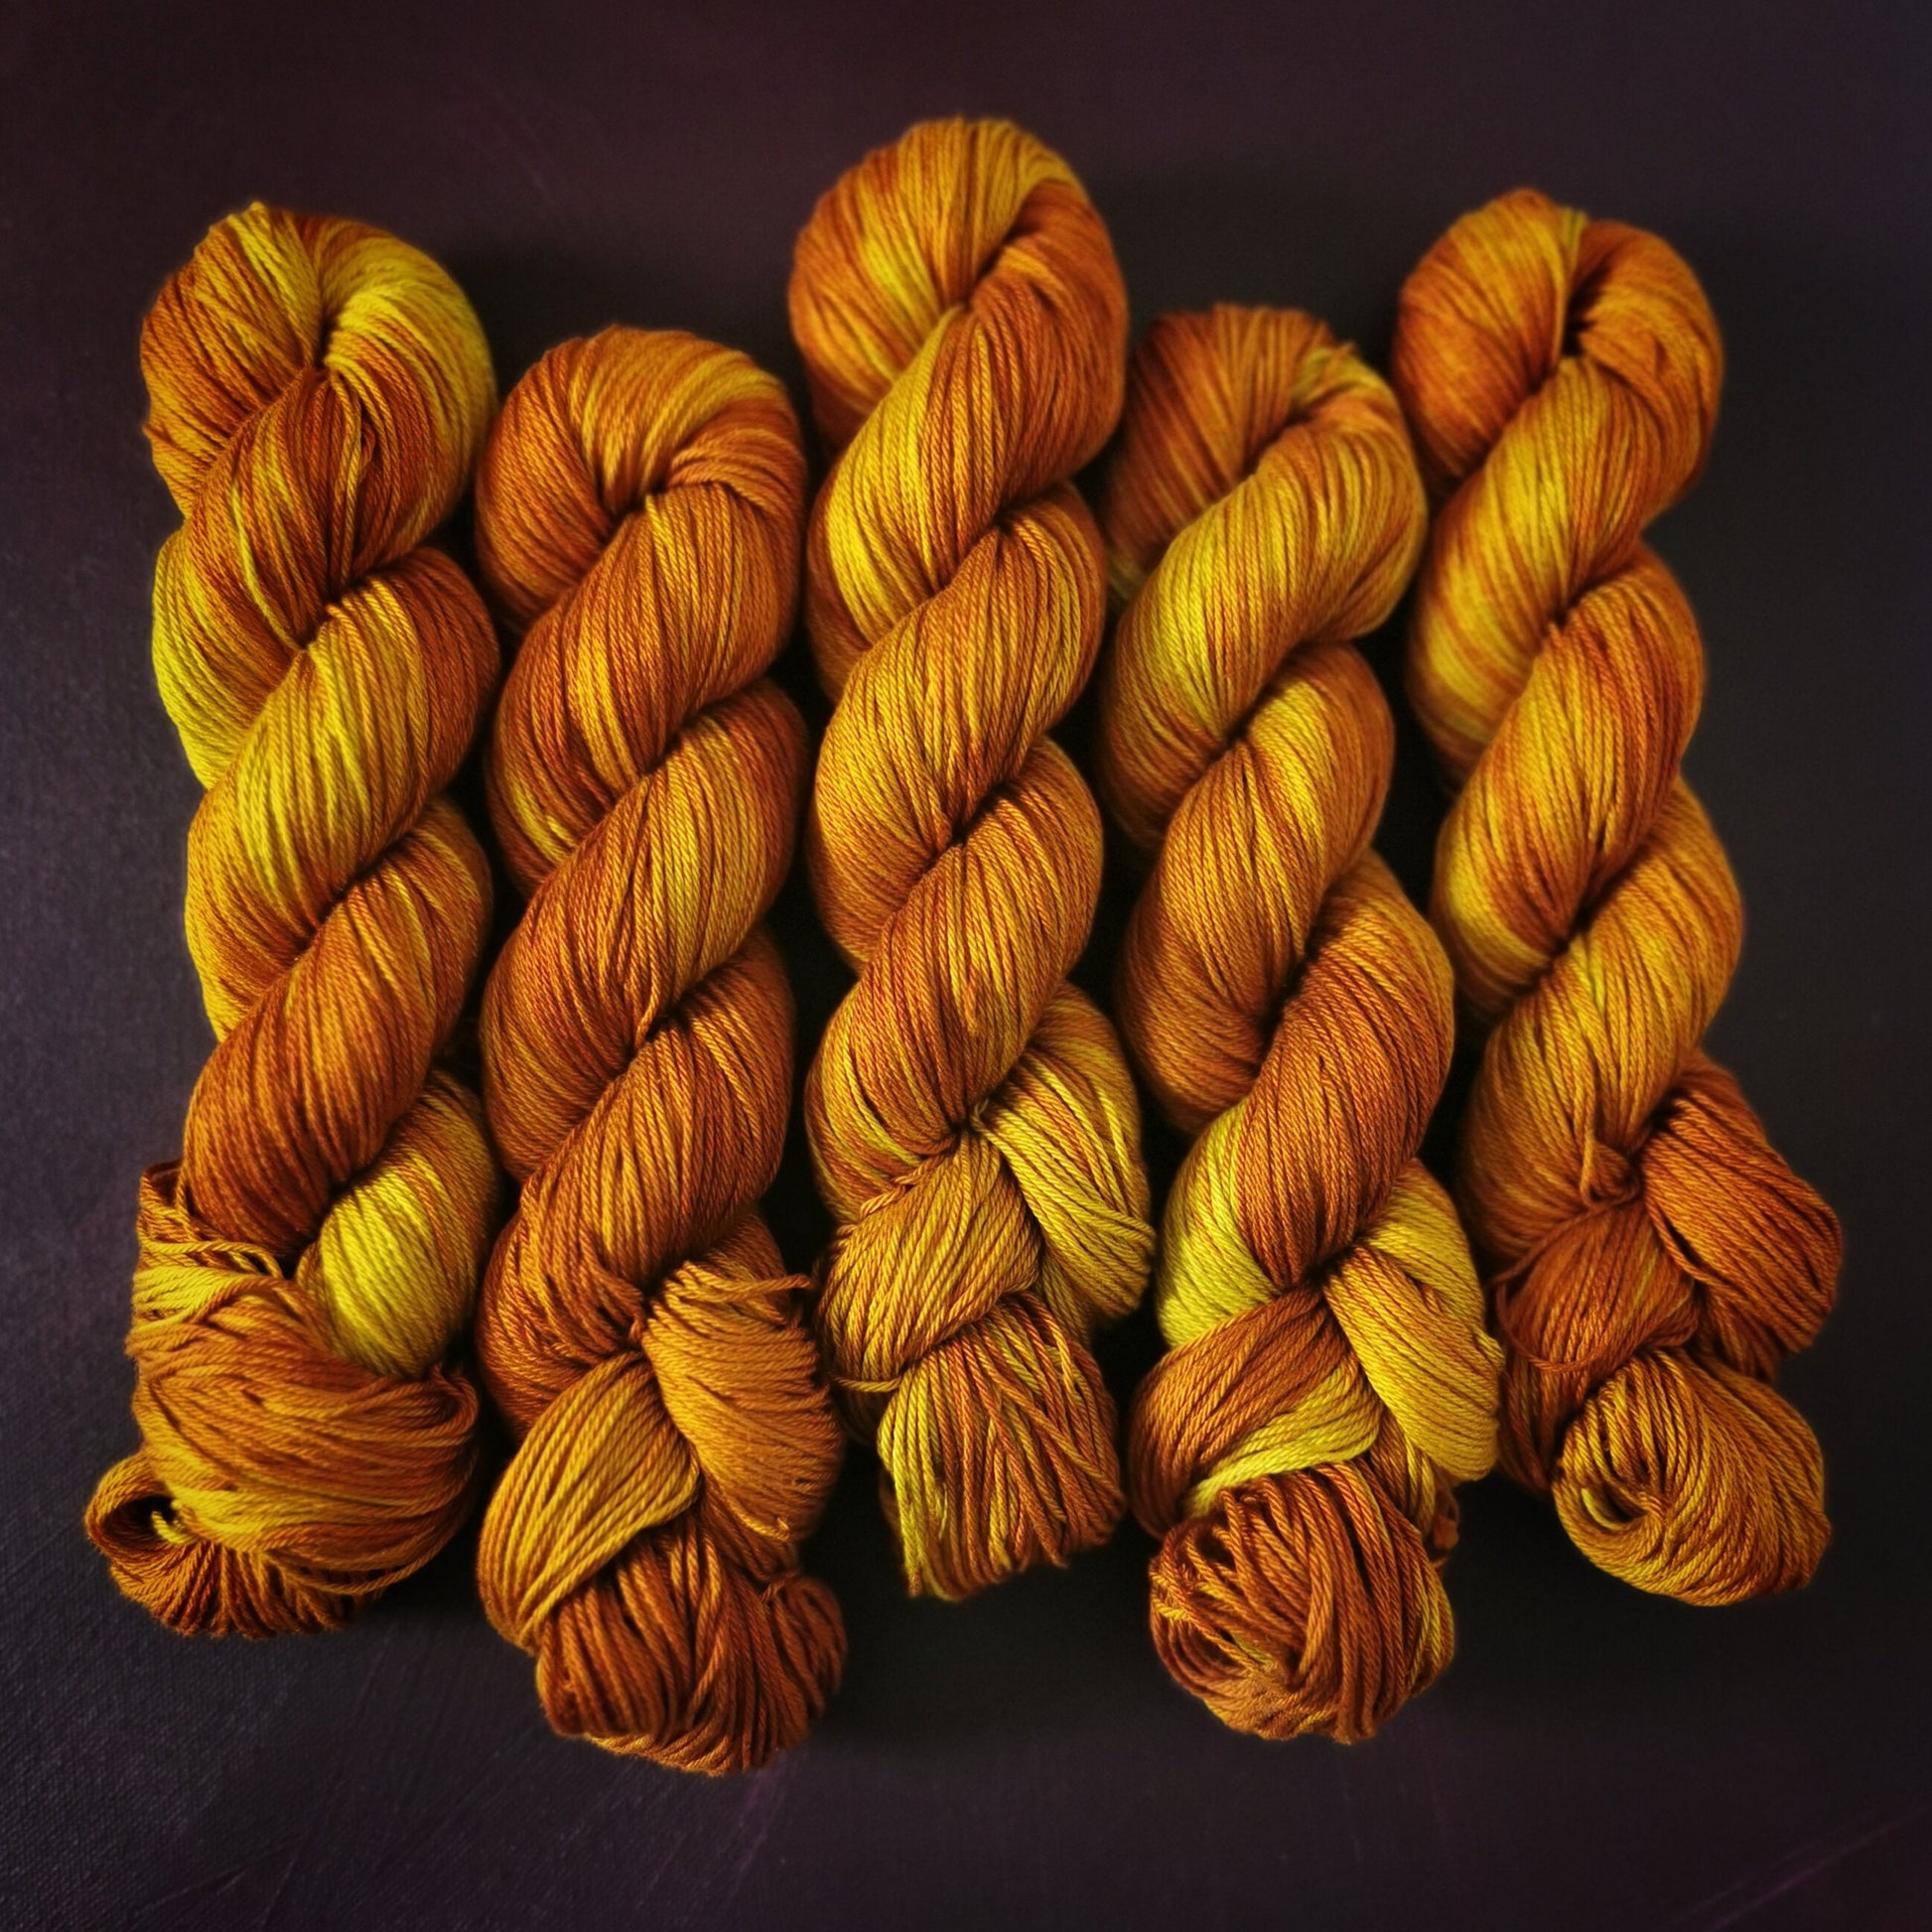 Hand dyed yarn ~ Tumeric Passion ~ mercerized cotton yarn, vegan, hand painted, indie dyed